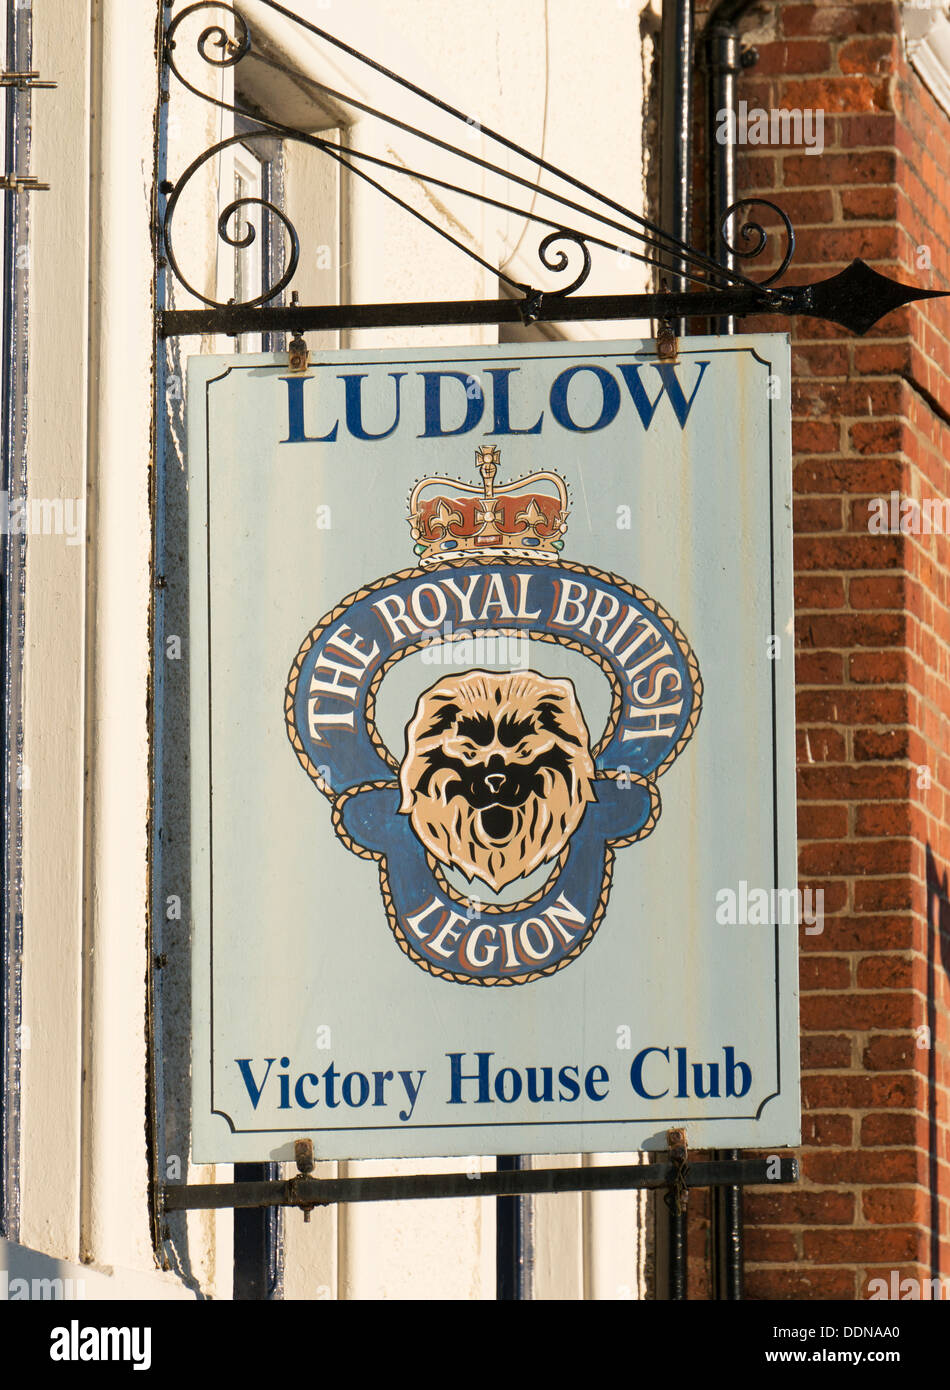 The Royal British Legion sign outside the Victory House Club Ludlow, England, UK Stock Photo